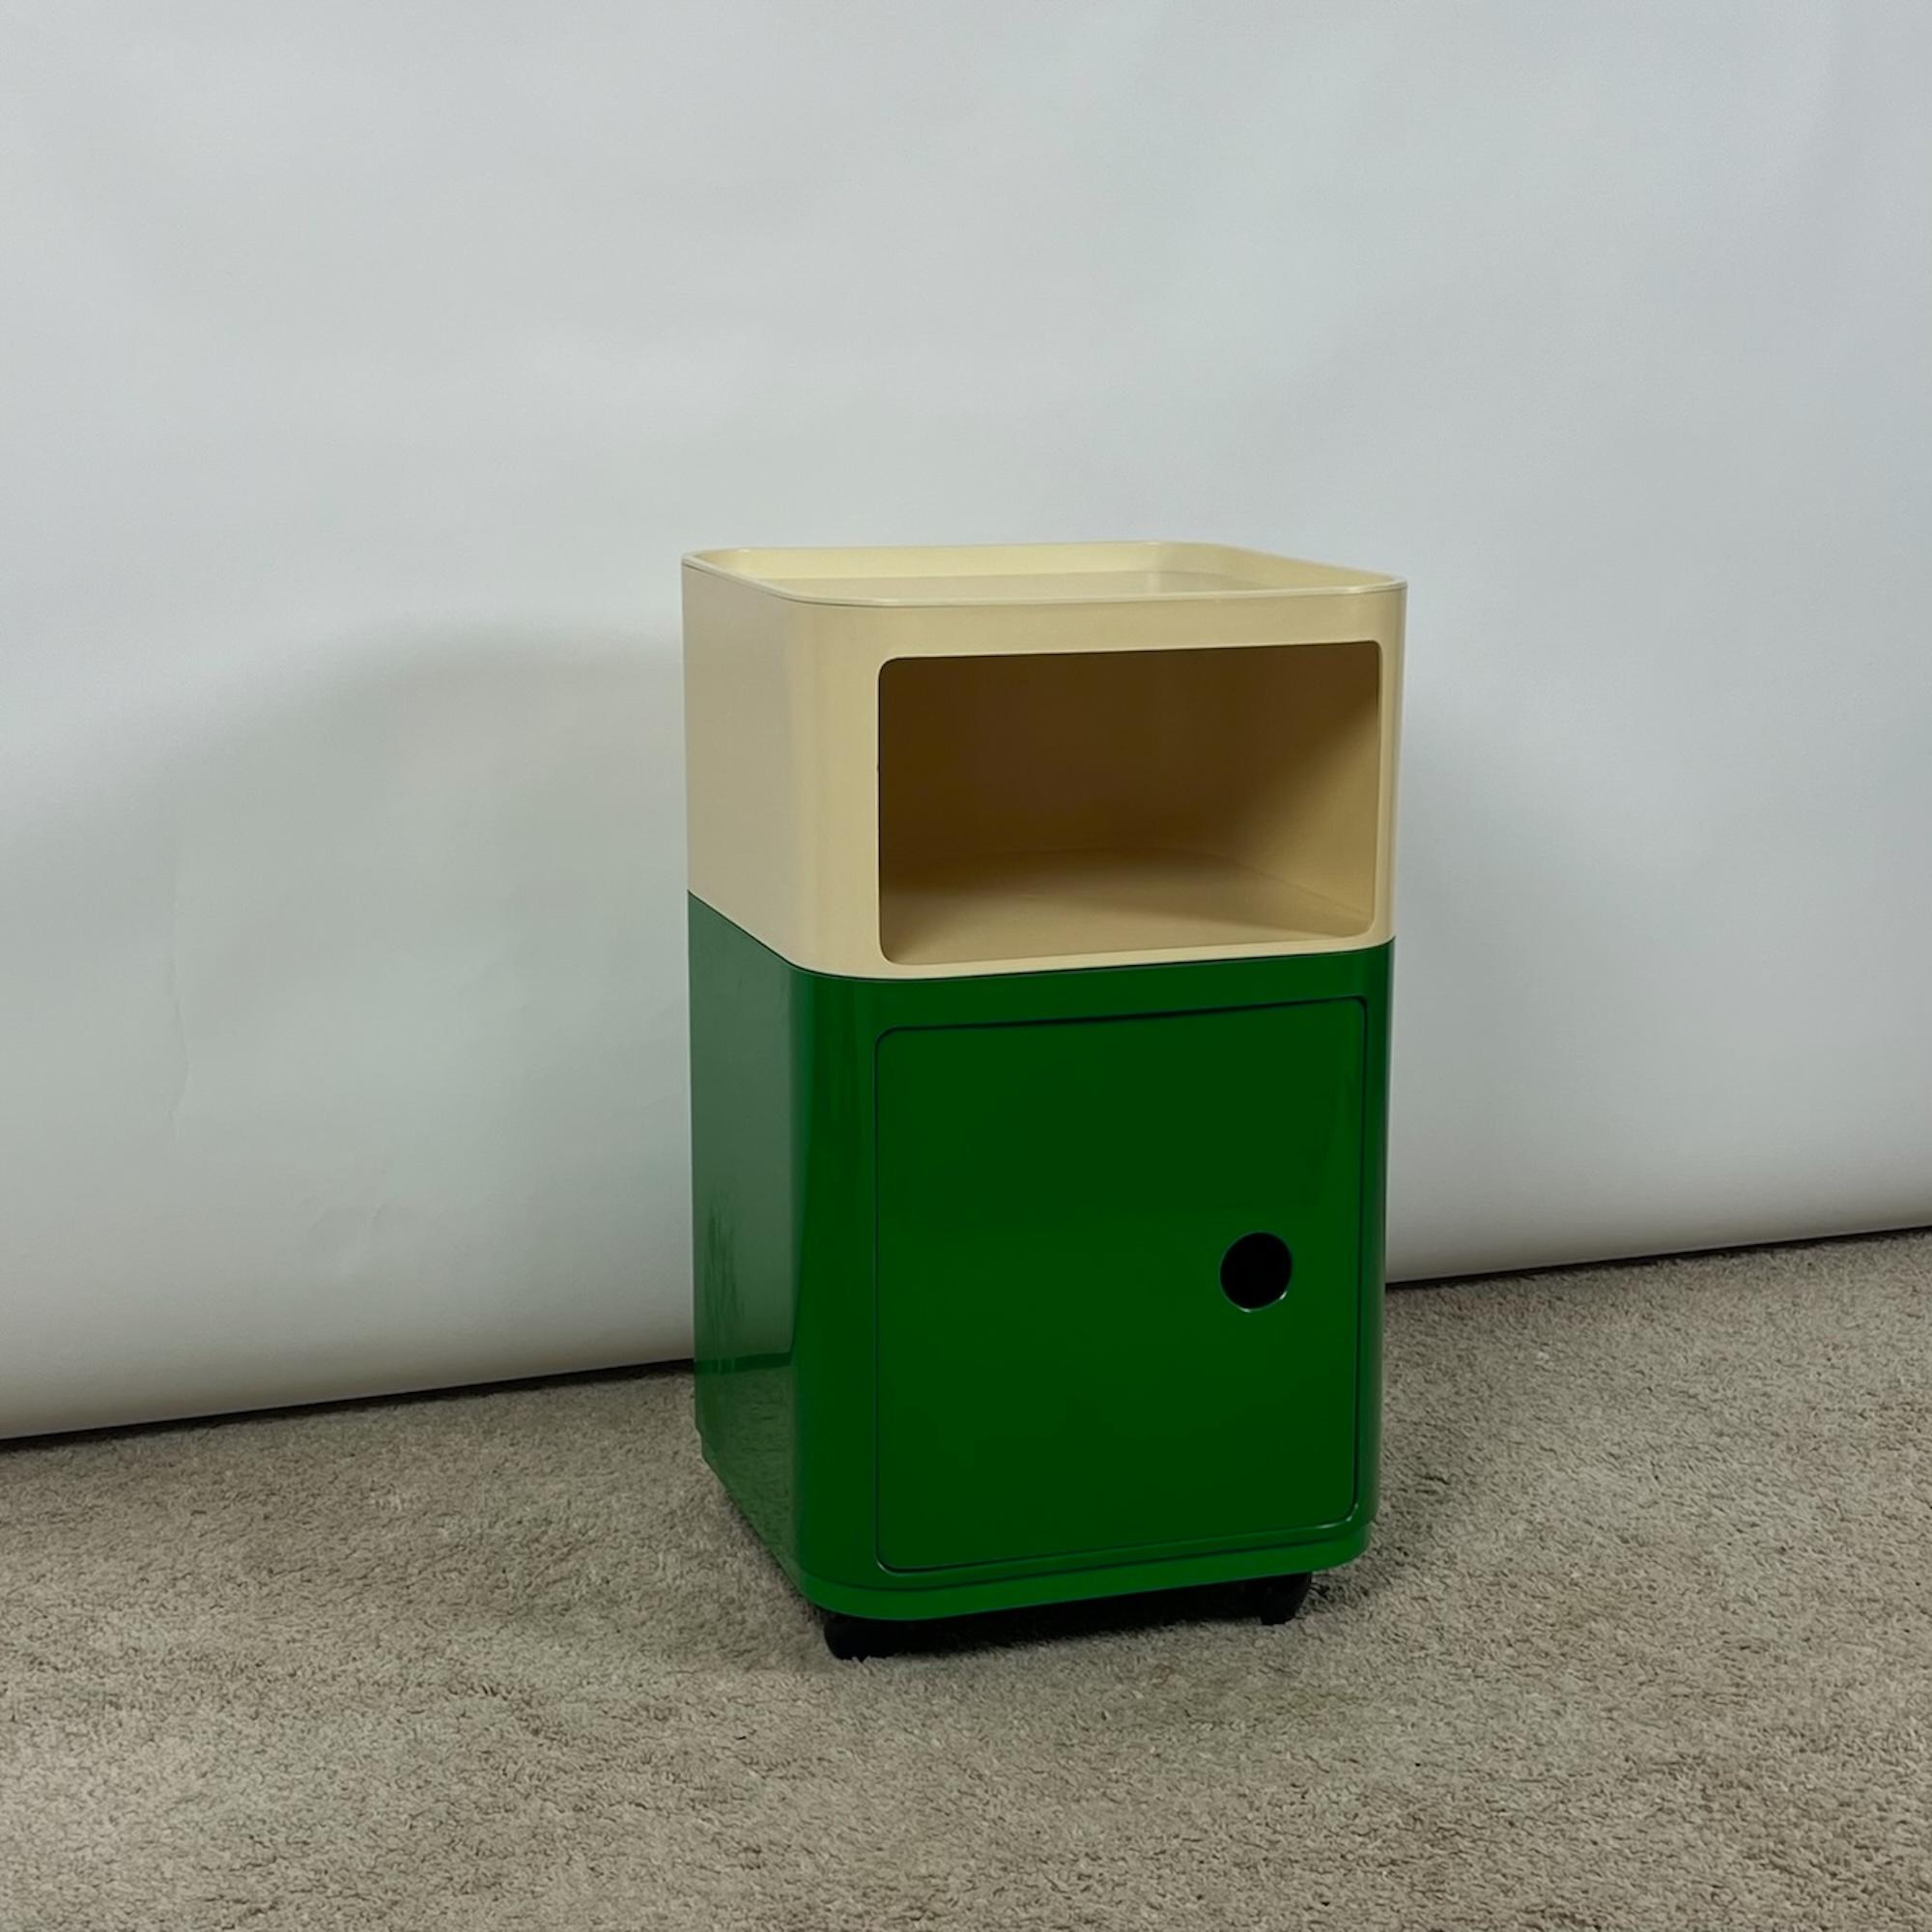 Kartell 'Componibili' Square Based Cabinet Modules in green and white, 1960s For Sale 3